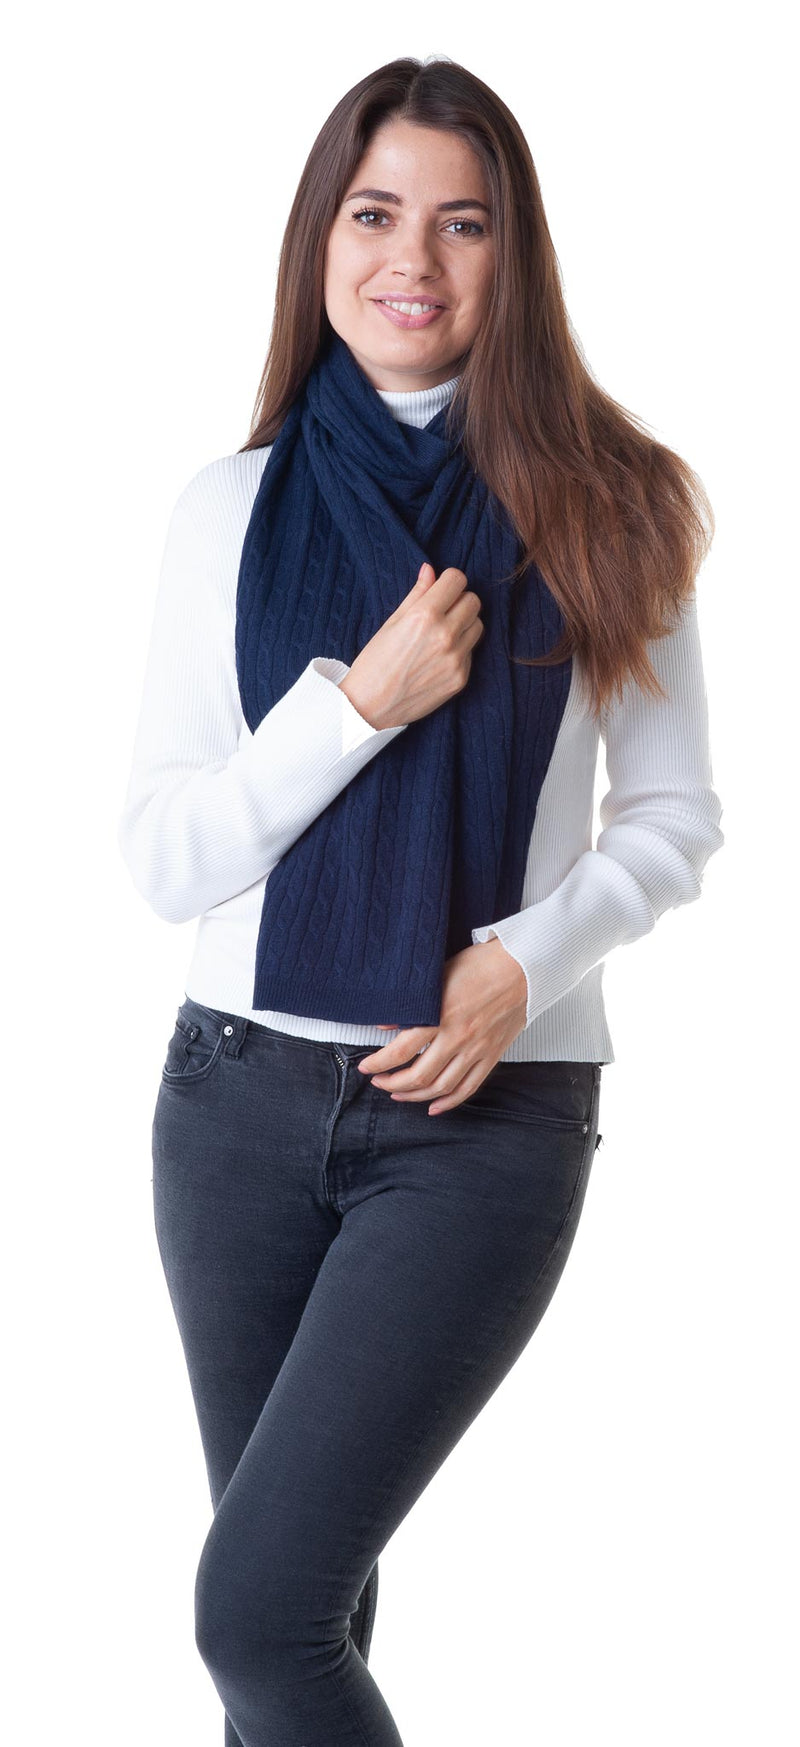 Cashmere Merino Scarf - Cable Knit - Soft Warm Scarf - Navy Blue